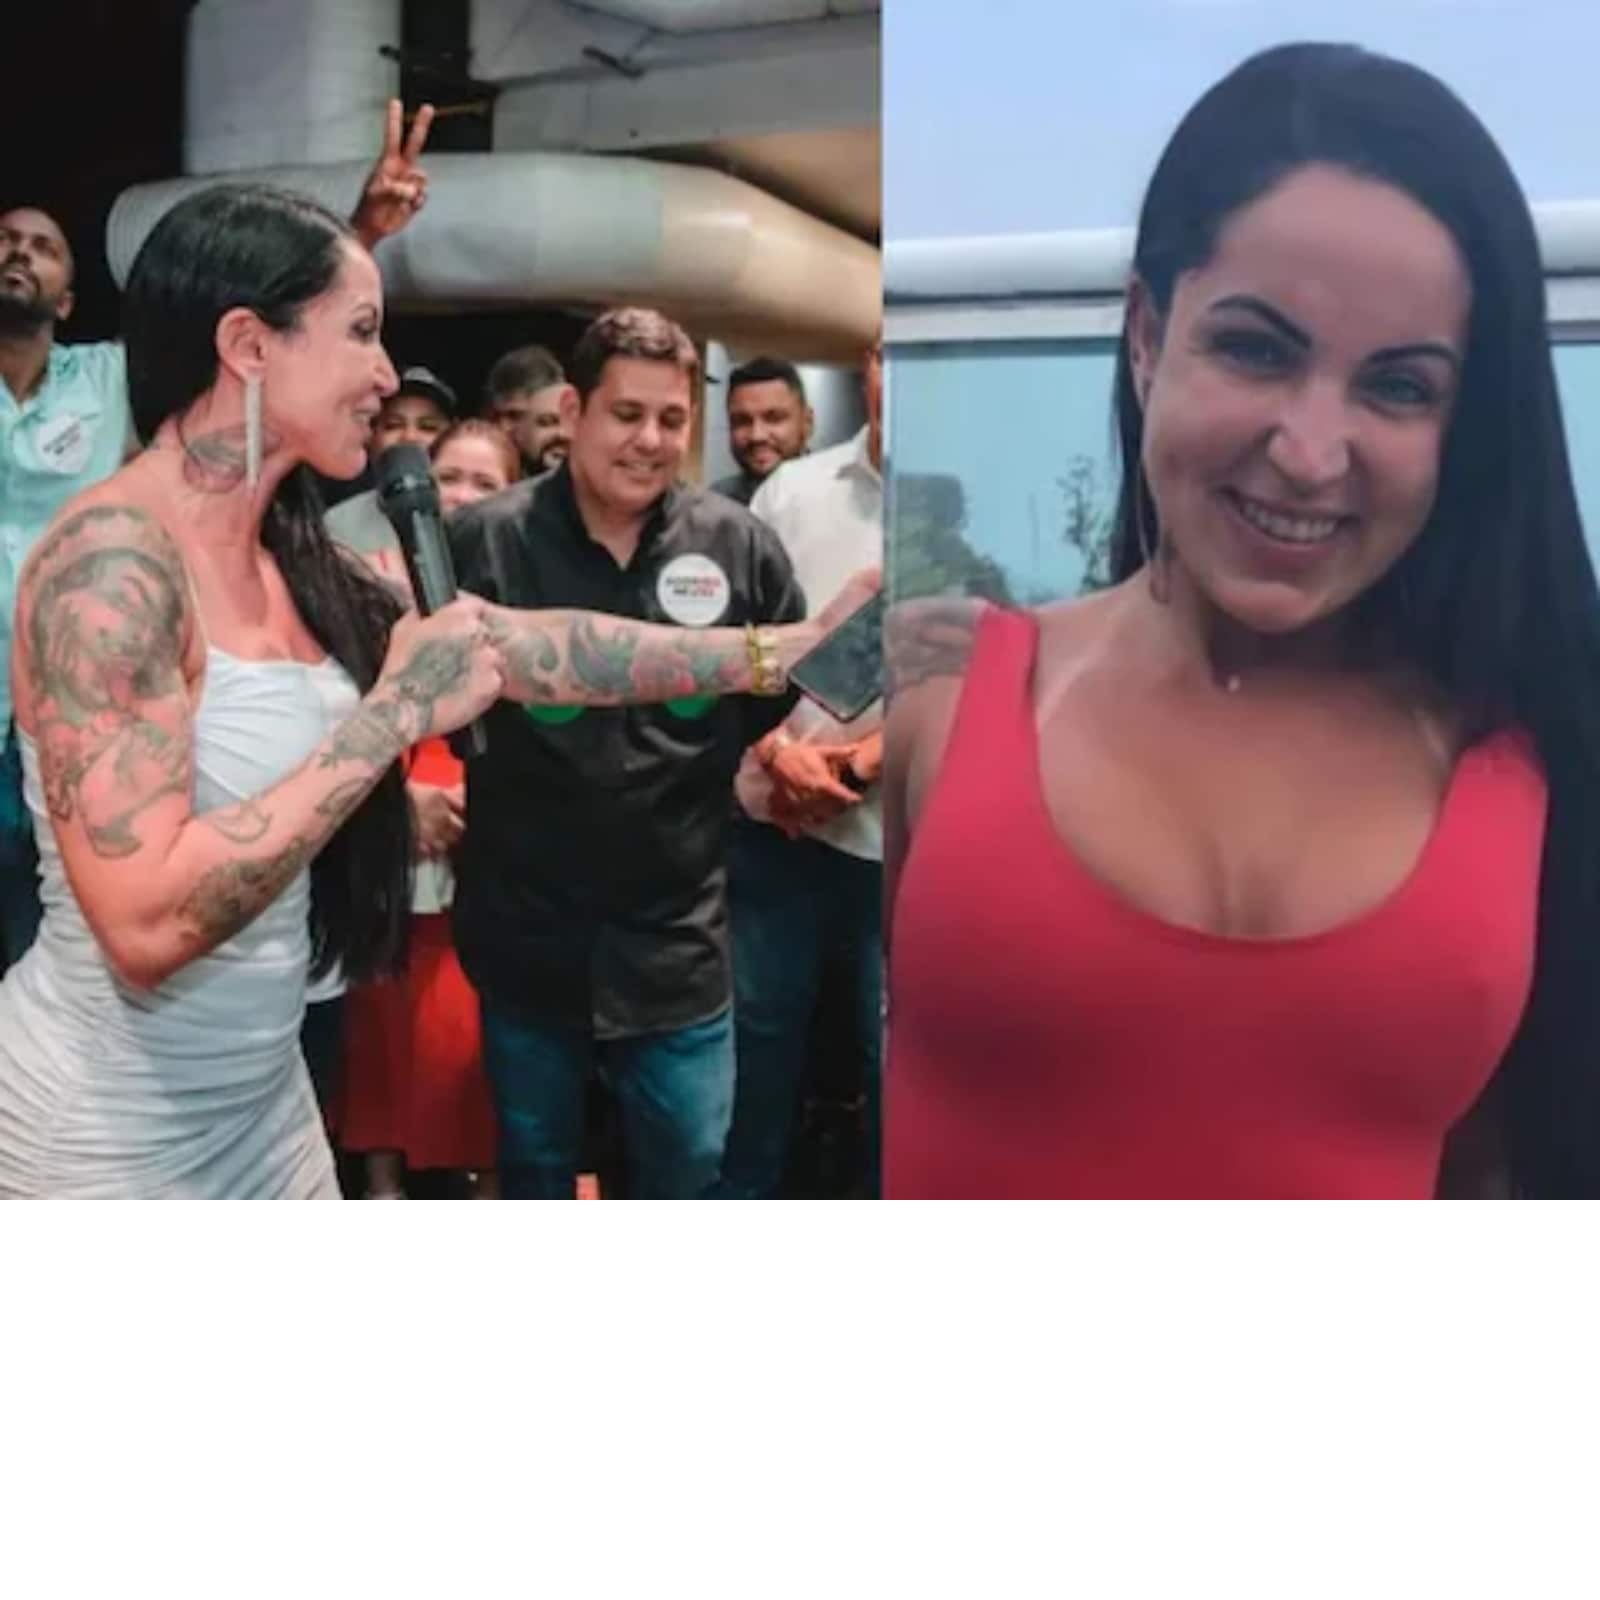 Brazilian Girls Porn - Ex-Adult Film Star to Run For Brazil Parliamentary Elections, Women Rights  on Agenda